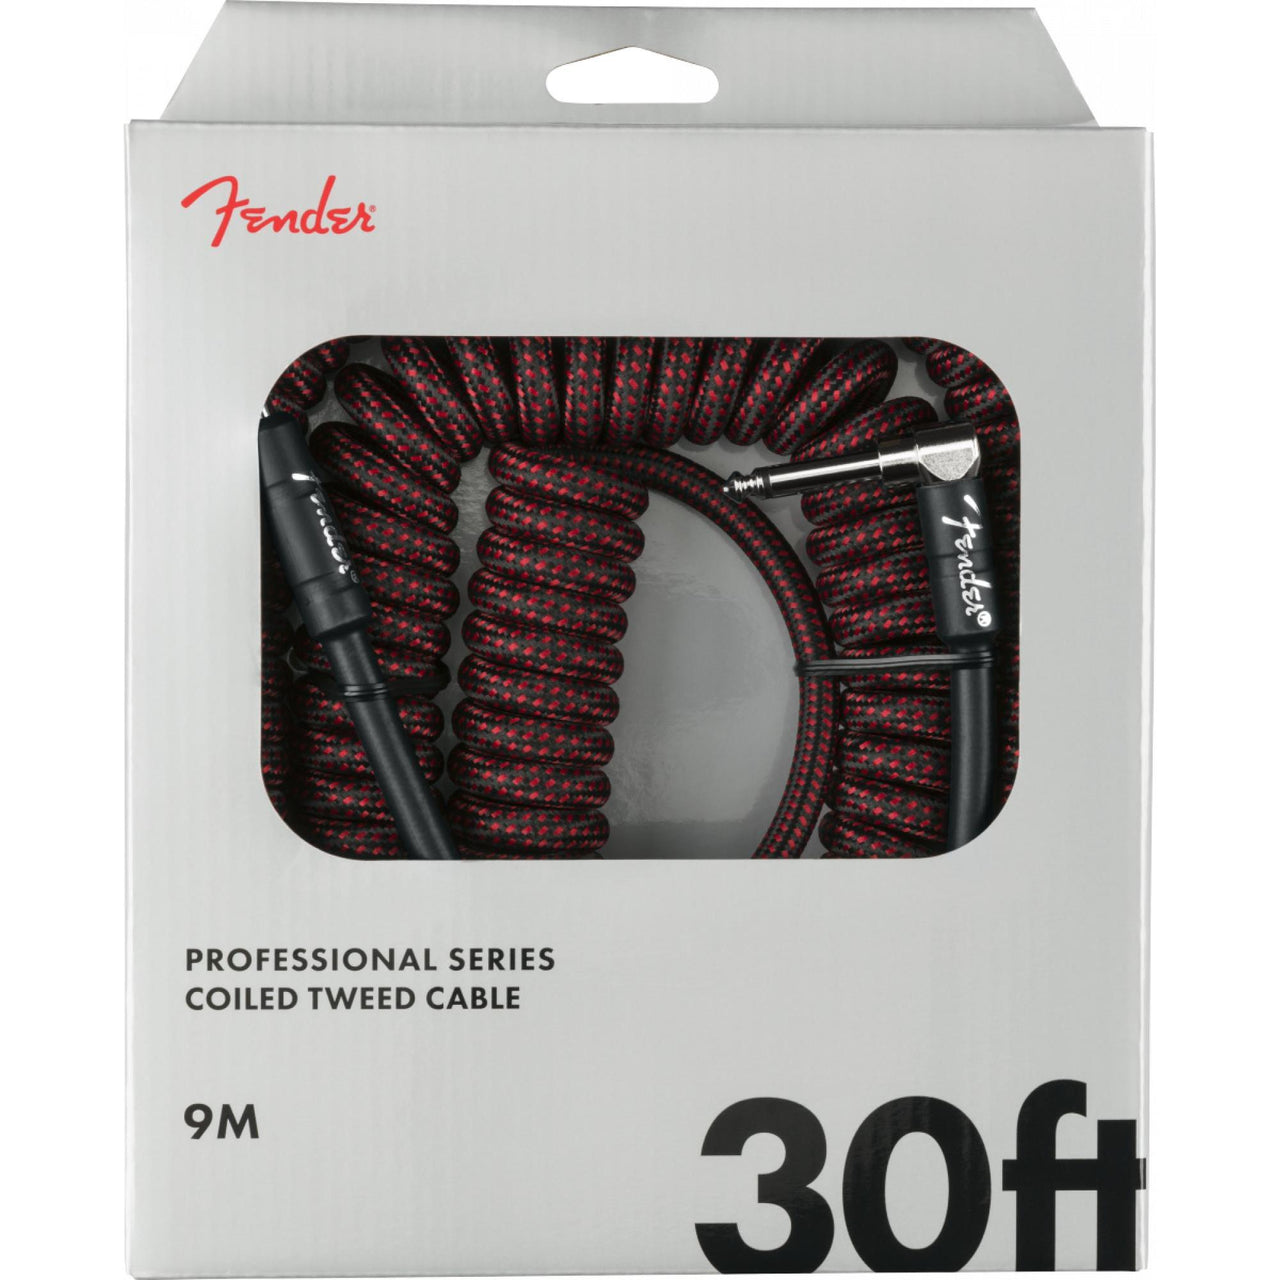 Cable Fender P/guitarra 9 Mts Pro Coil Red Twd, 0990823054